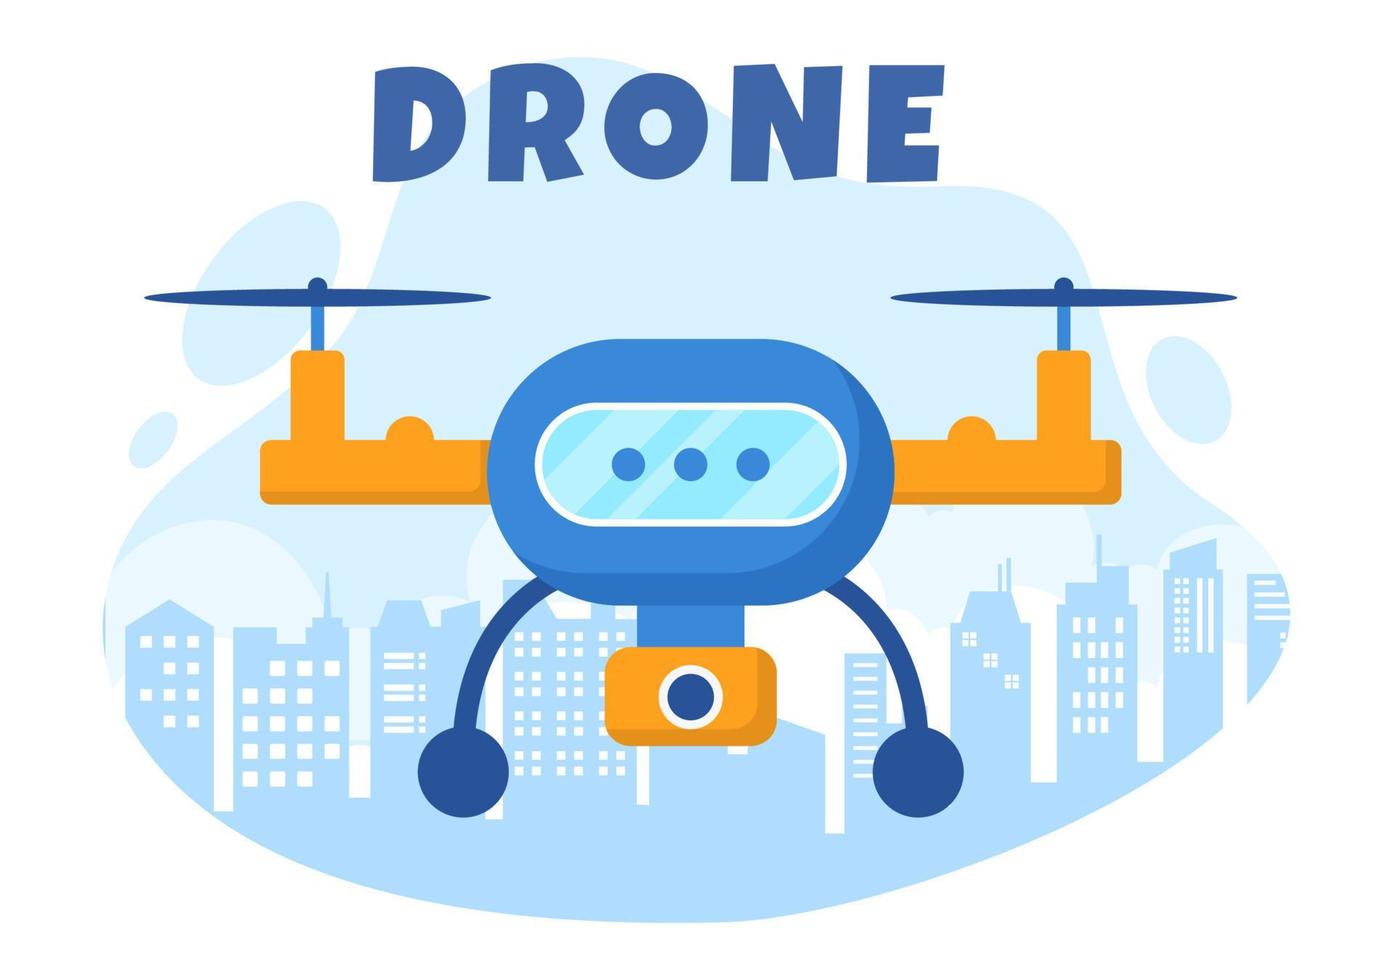 Drone with Camera Remote Control Driven Flying Over to Taking Photography and Video Recording in Flat Cartoon Background illustration vector